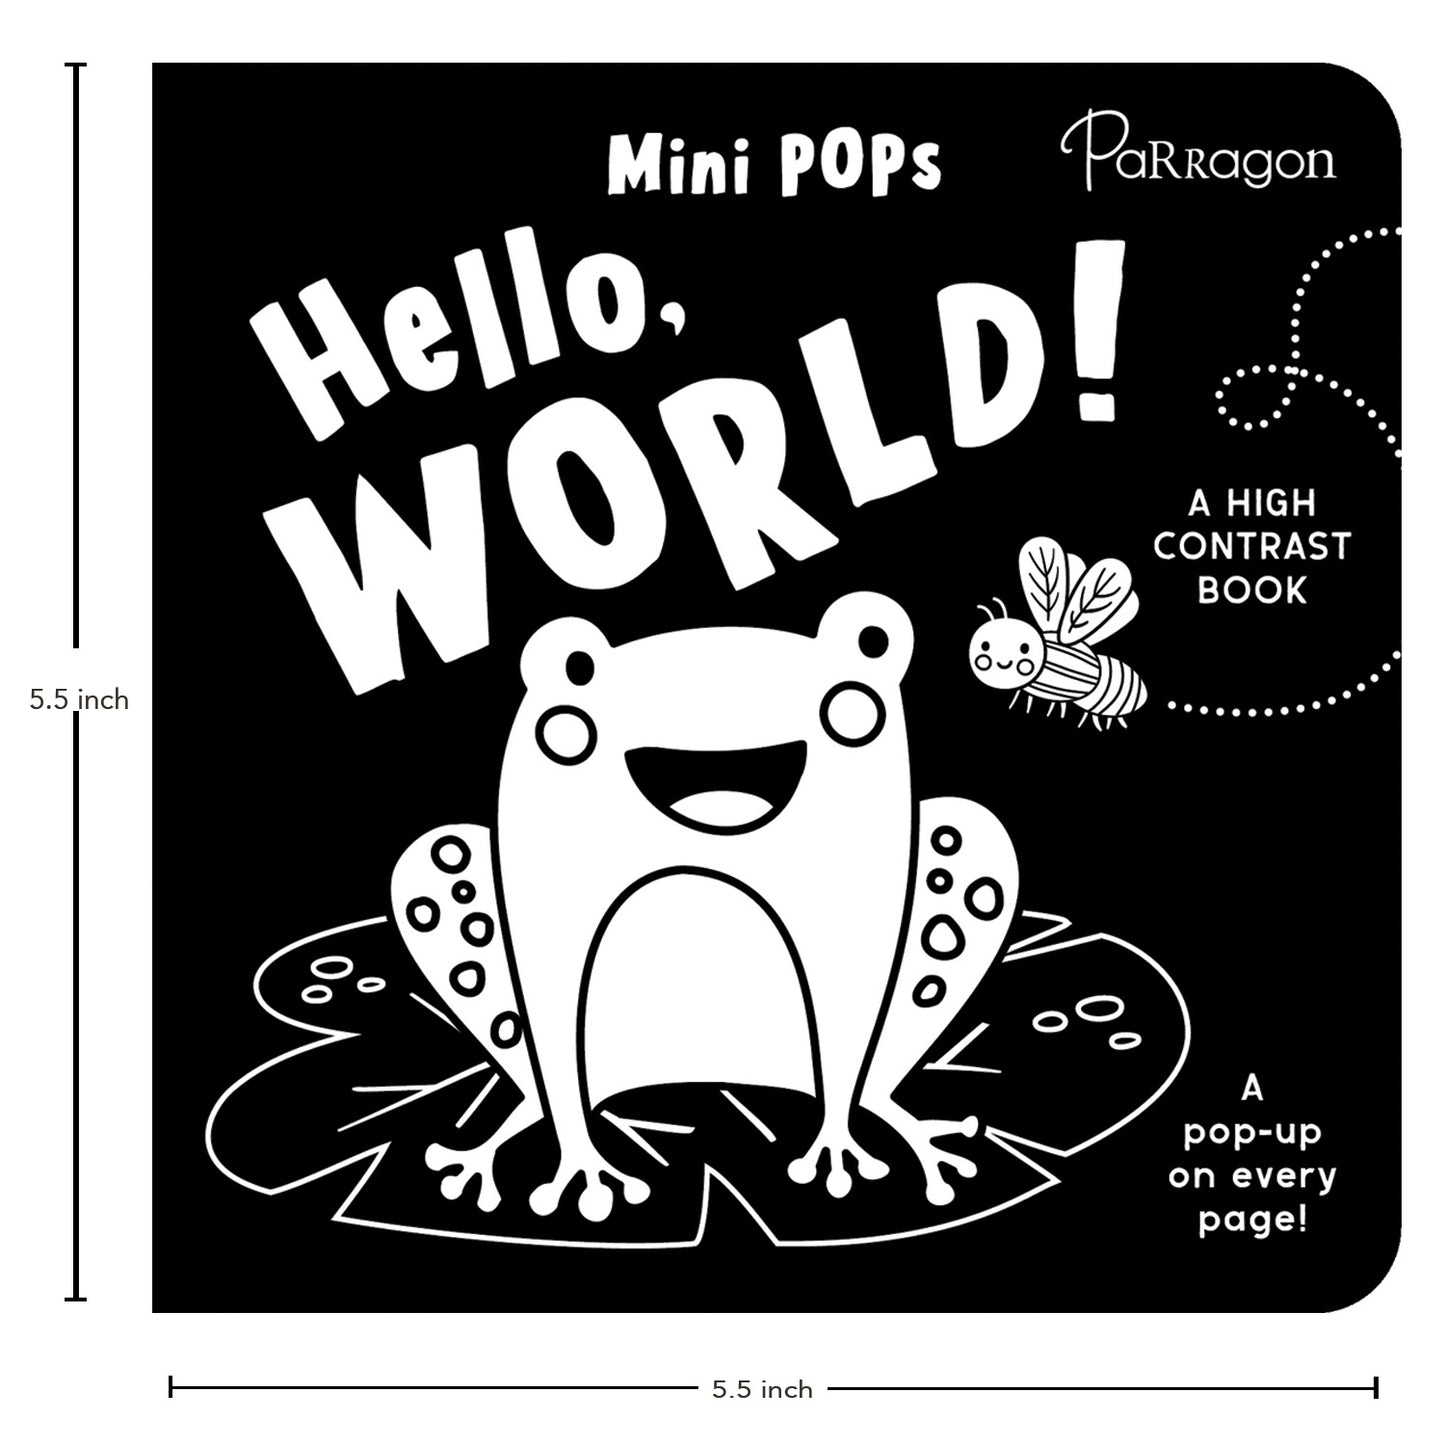 Mini Pops‐ Hello World (Pop-up book) | For Kids 1 to 3 Year's Old